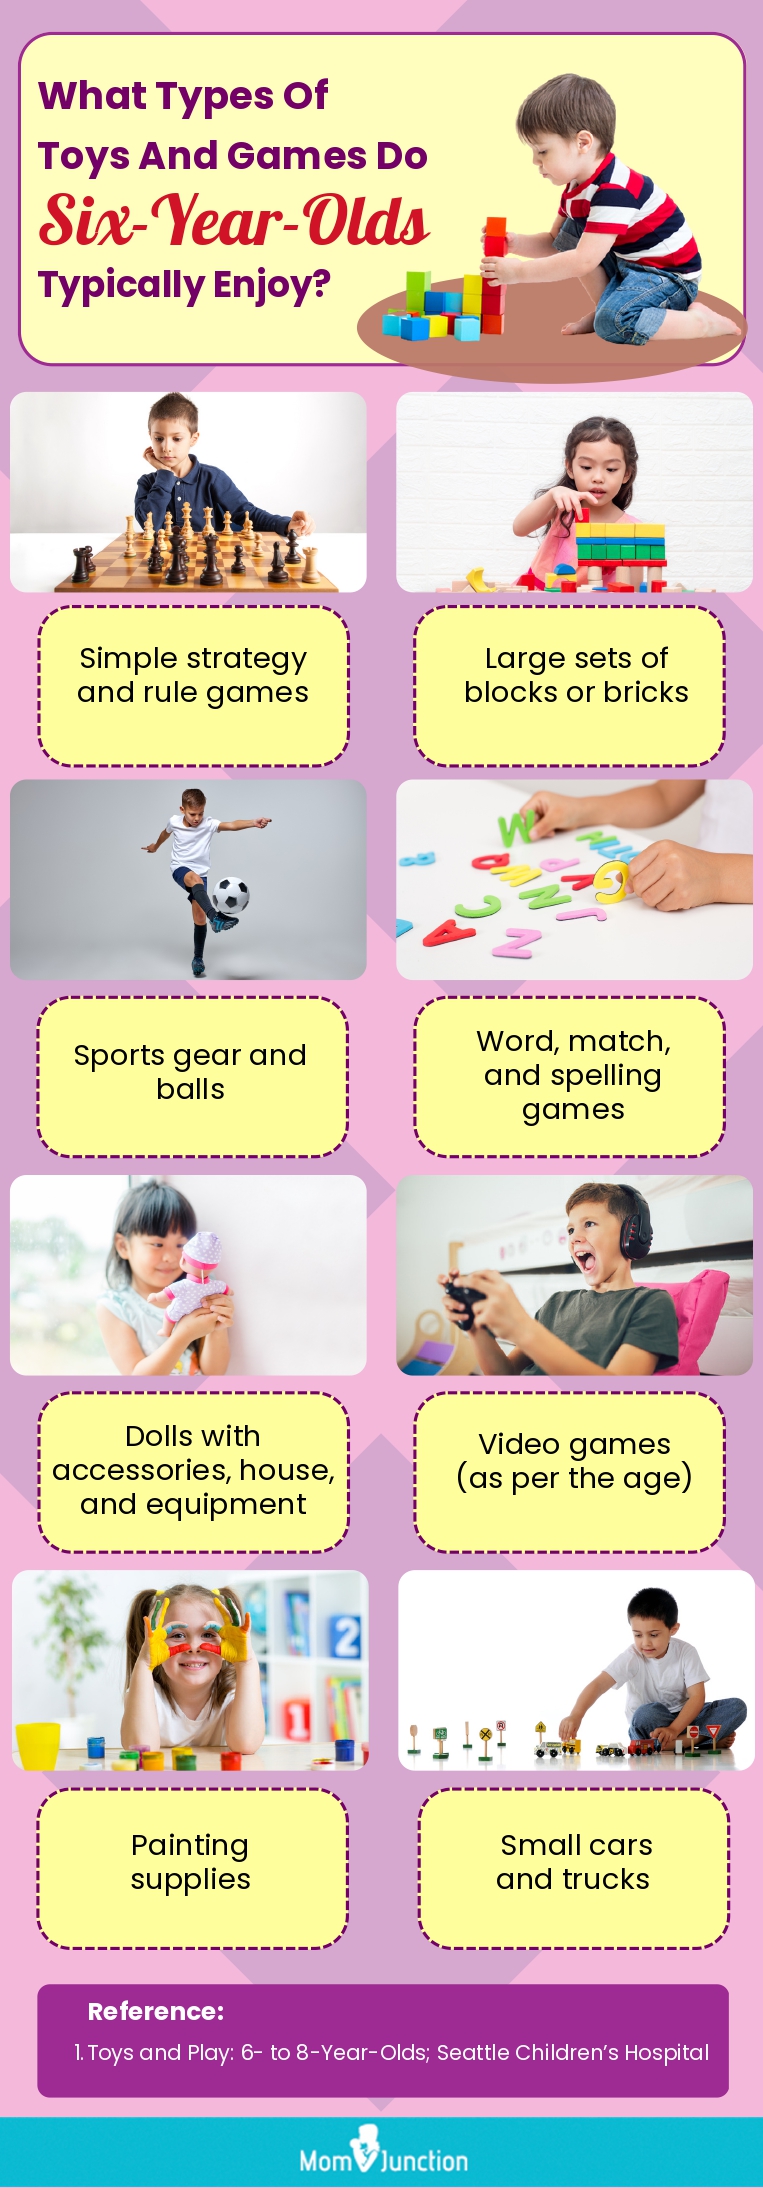 What Types Of Toys And Games Do Six-Year-Olds Typically Enjoy (infographic)